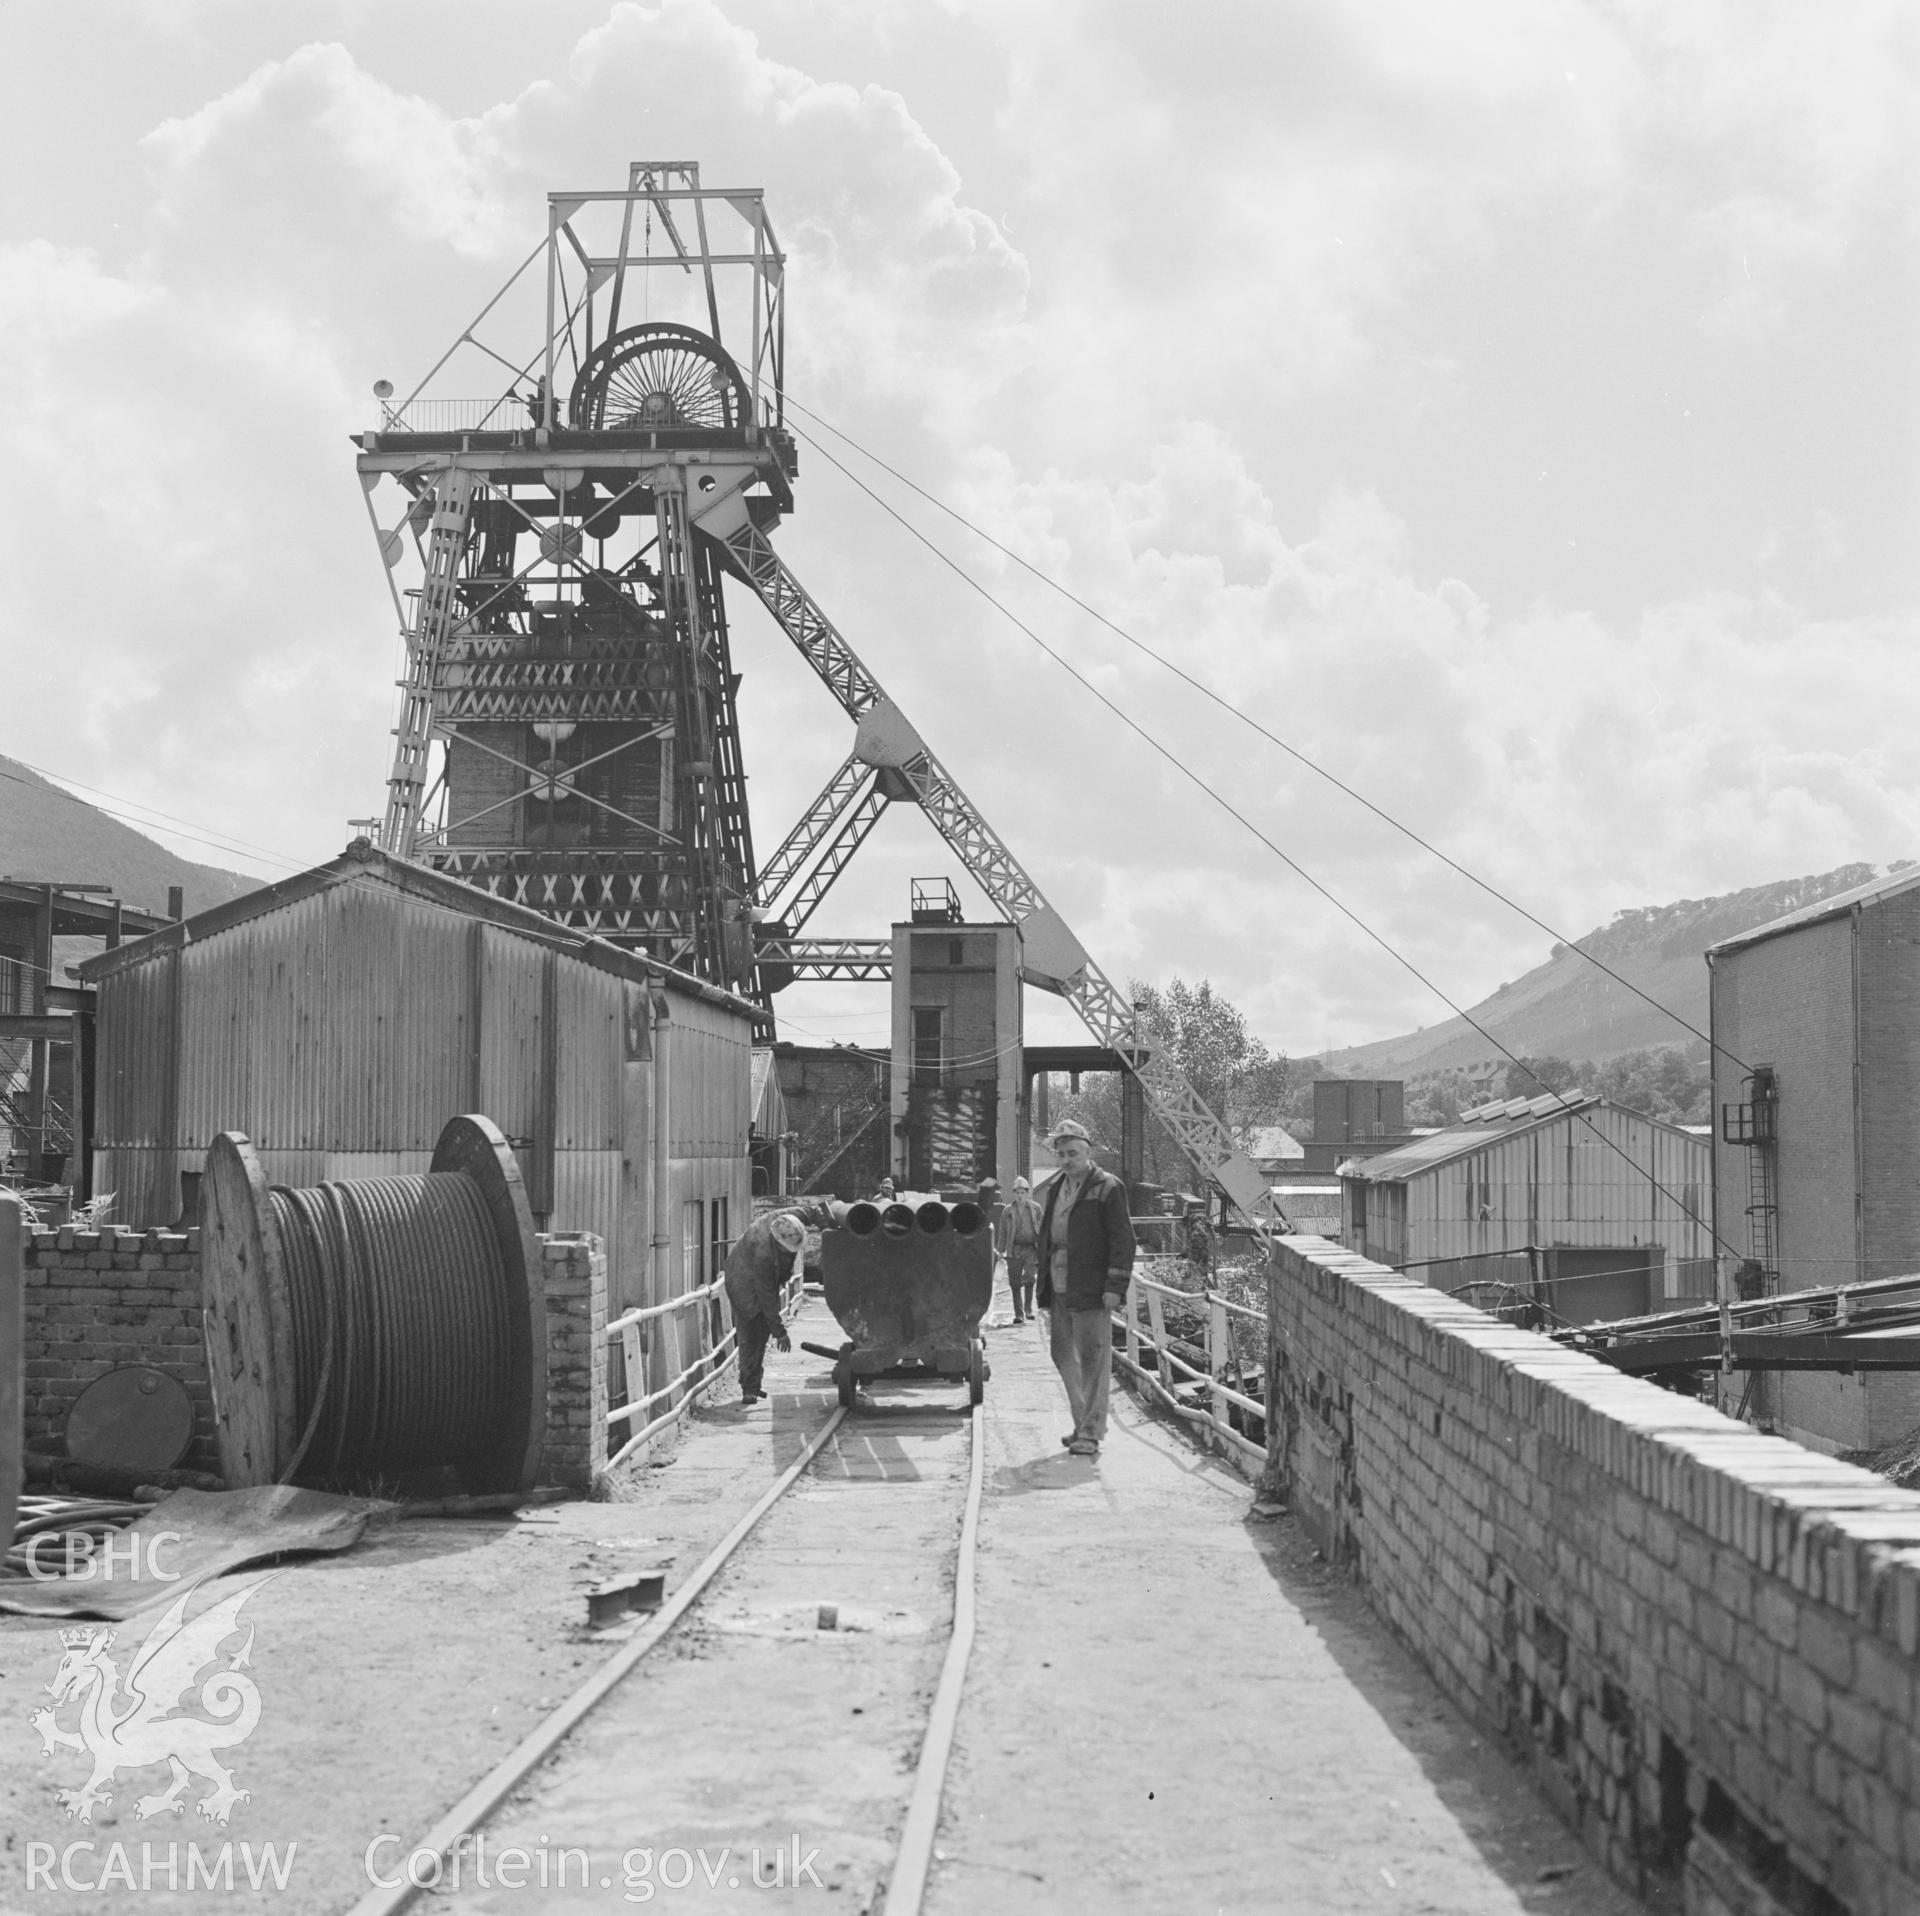 Digital copy of an acetate negative showing afternoon shift at Taff Colliery, from the John Cornwell Collection.